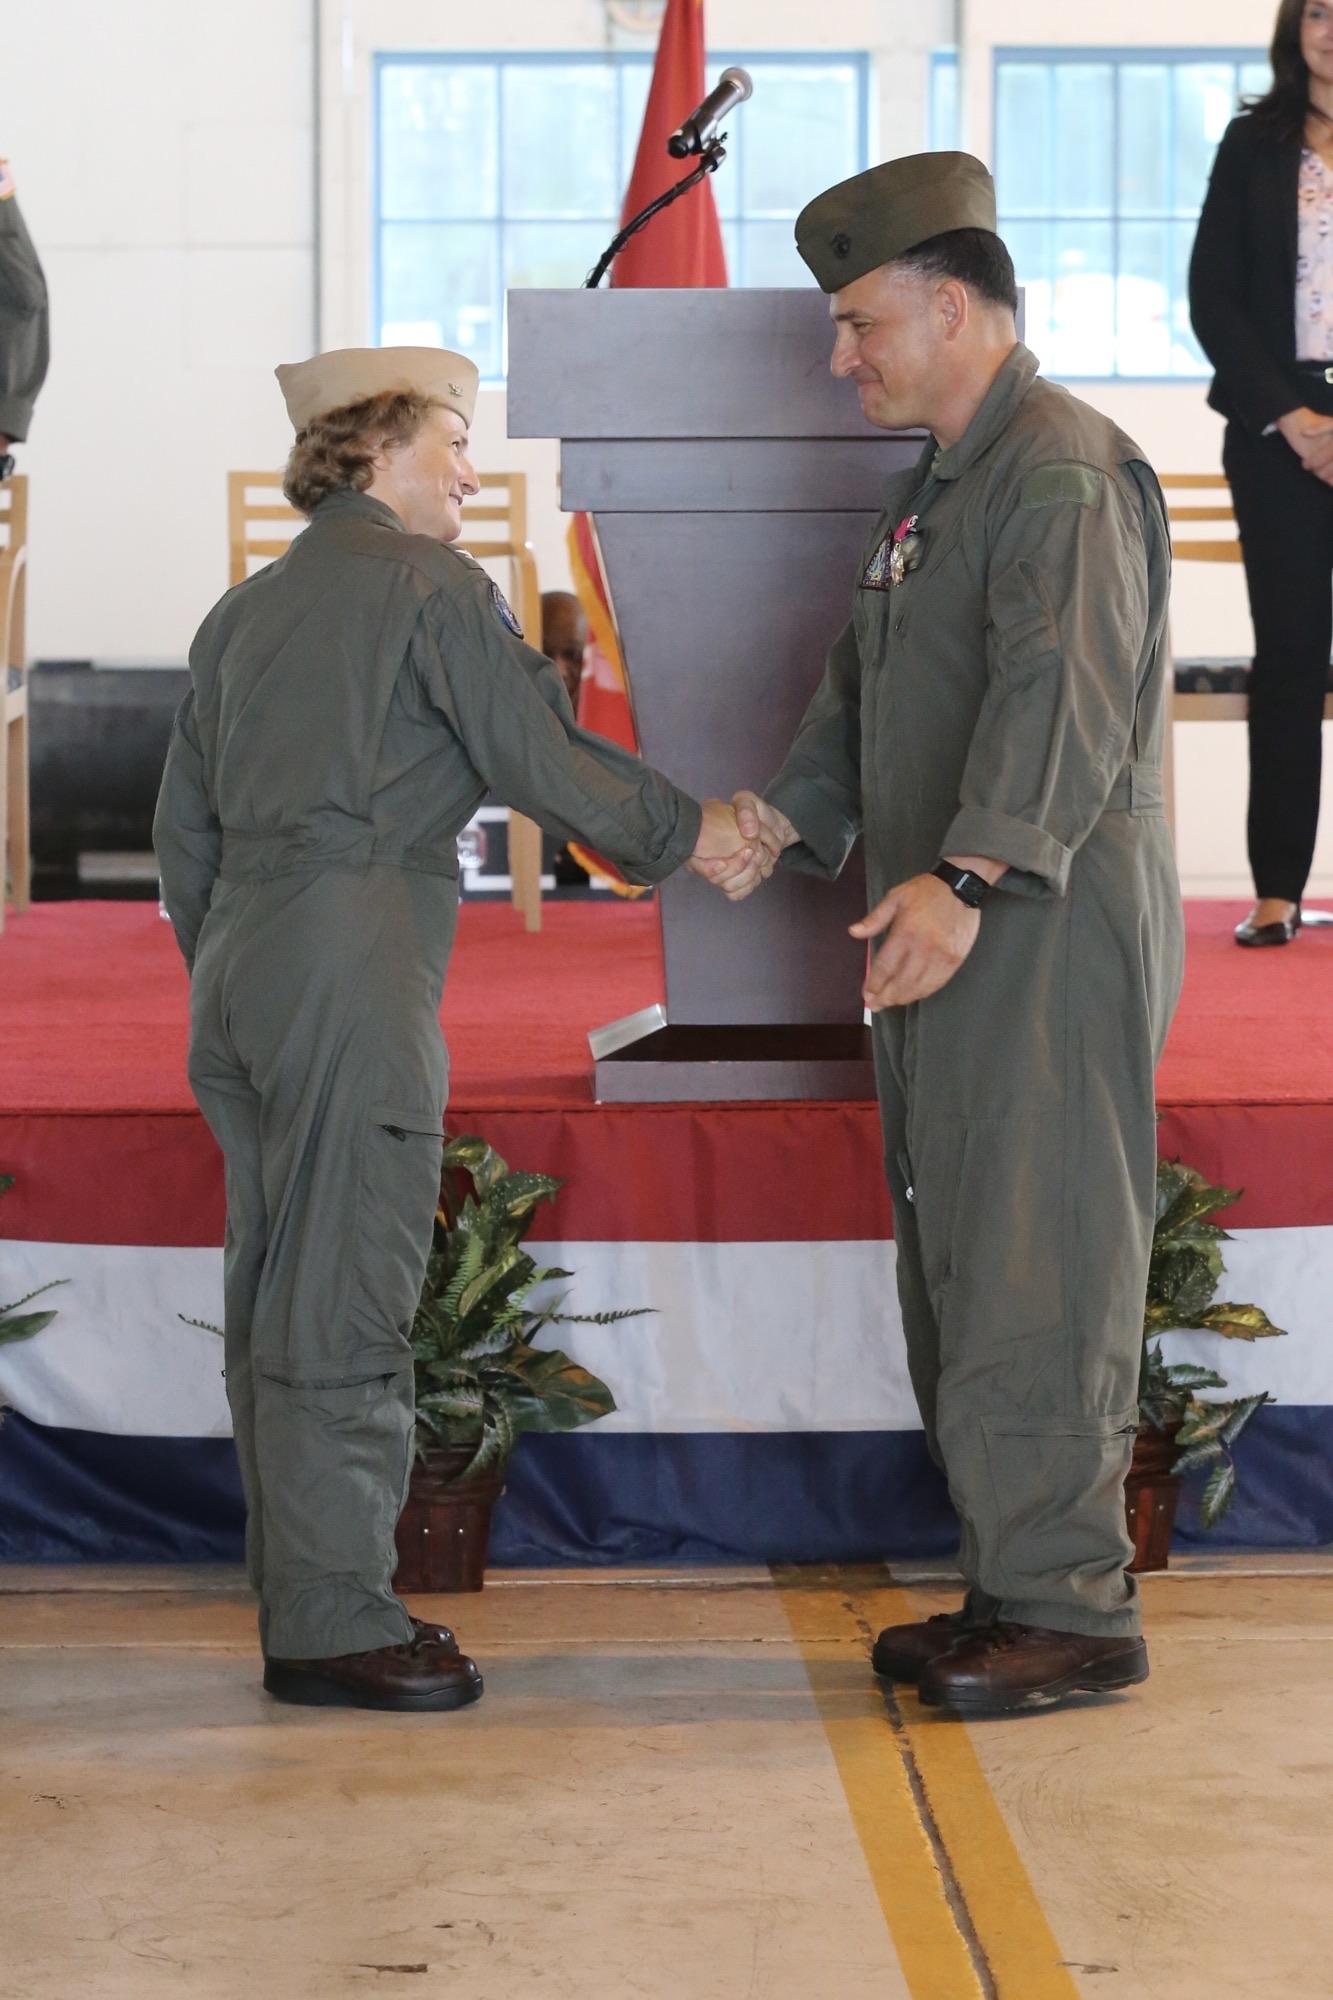 Capt. Elizabeth Somerville shakes hands with Col. Richard Marigliano in front of the podium during a change of command ceremony.